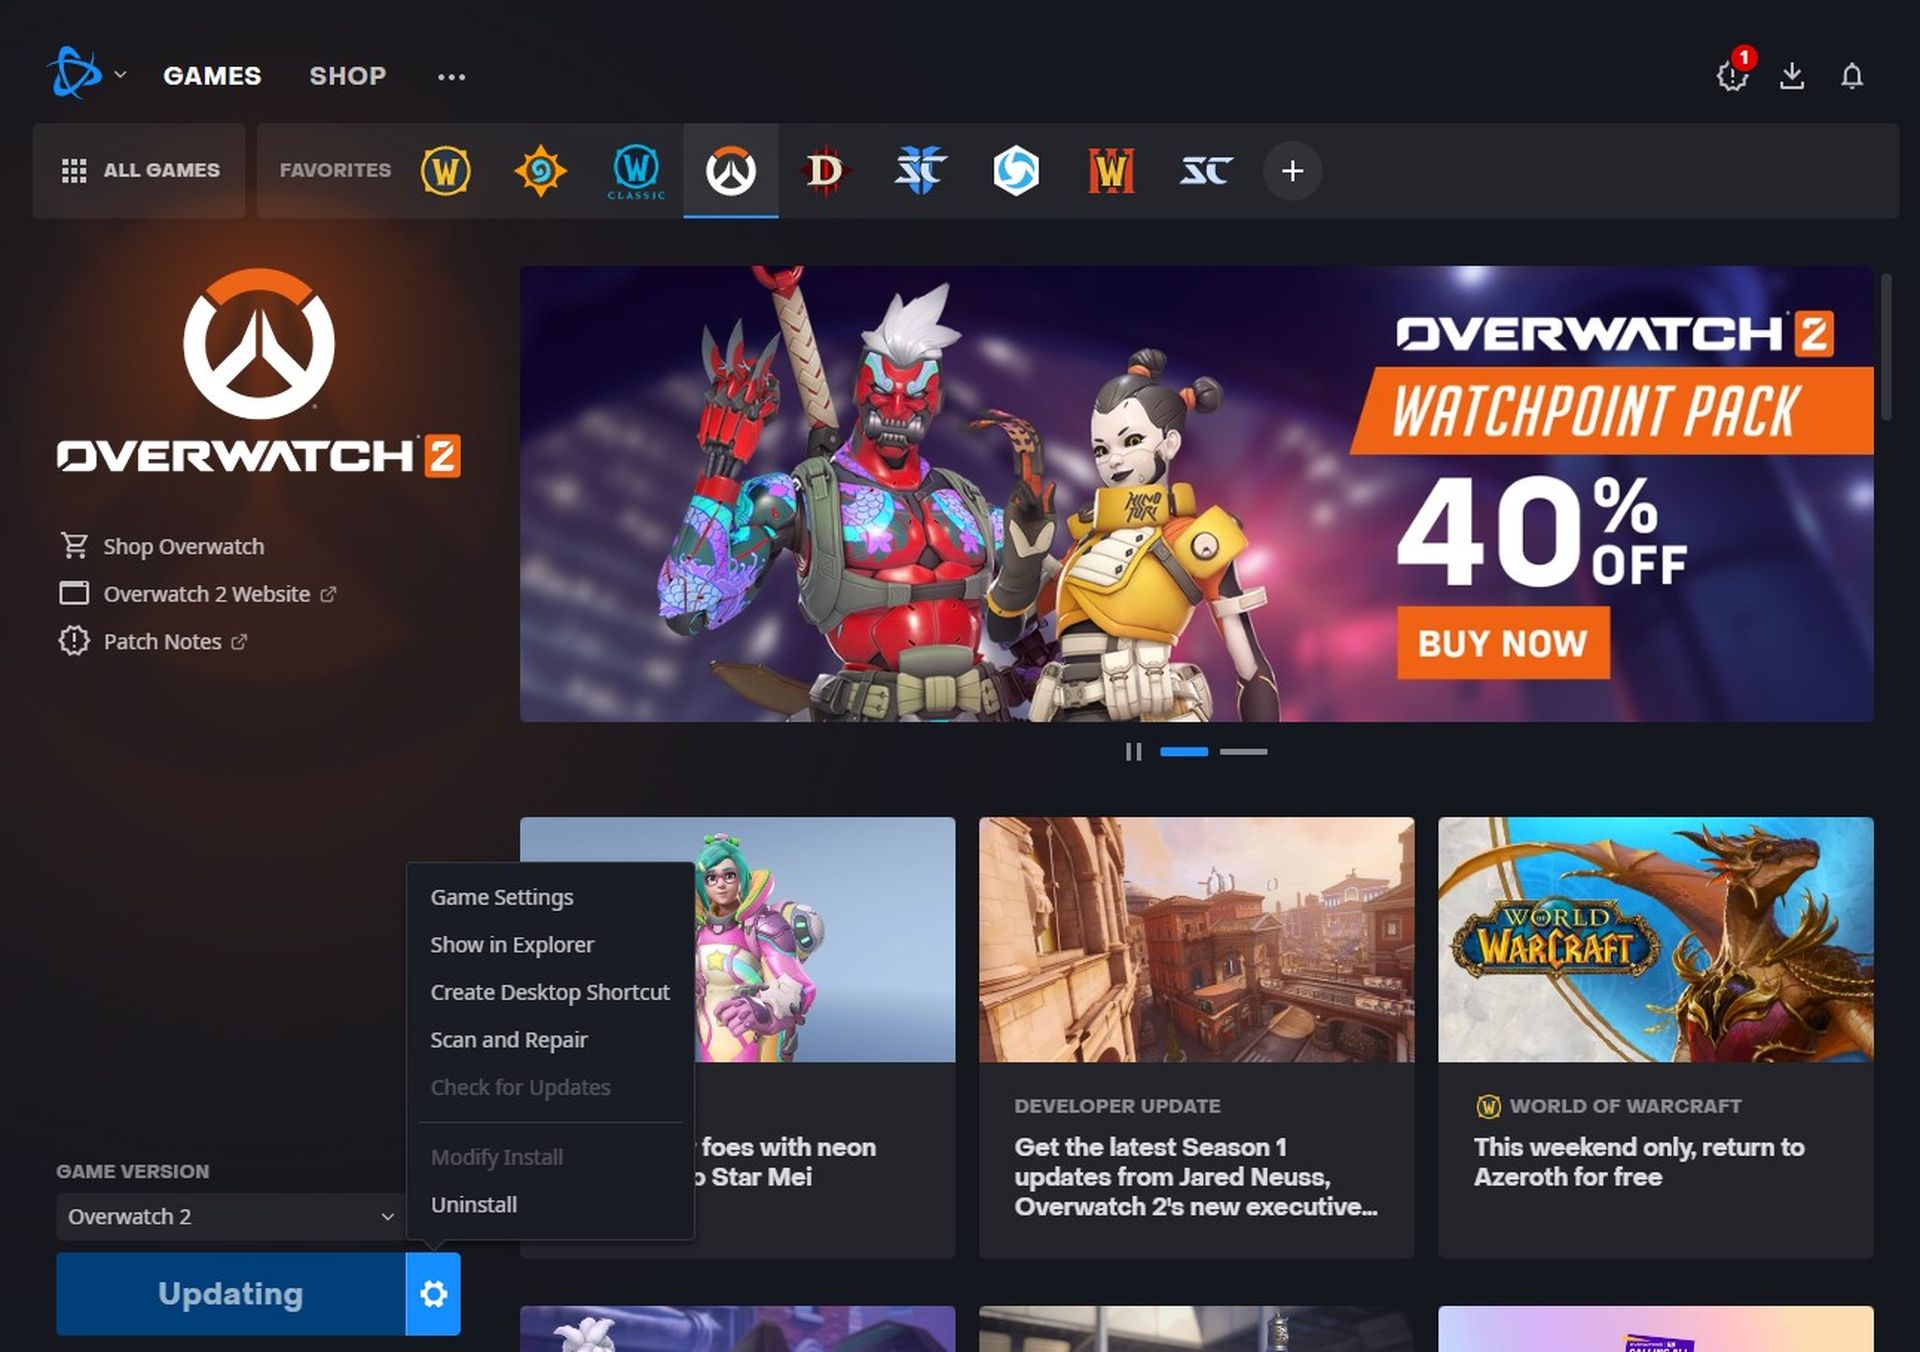 Overwatch 2 crashing mid game: Check for updates and repair